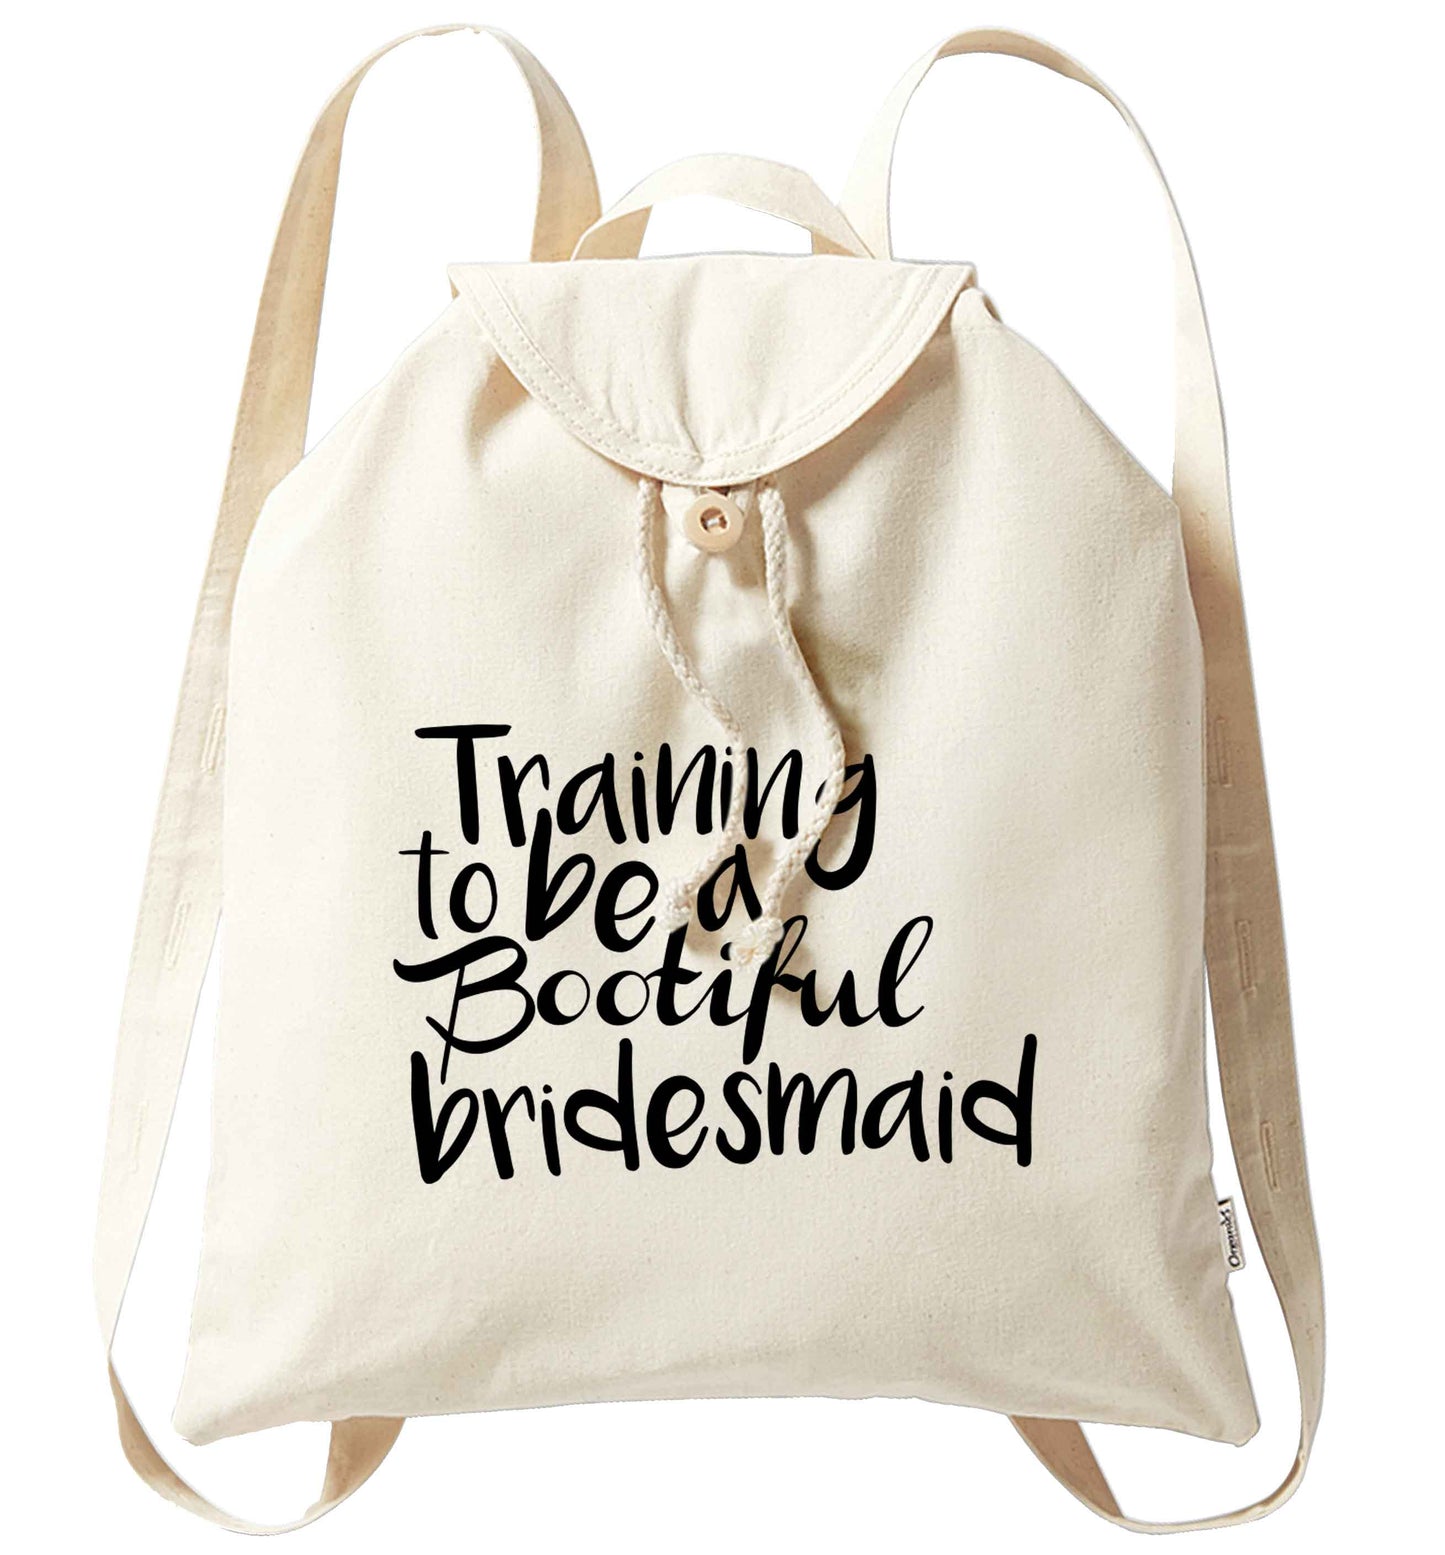 Get motivated and get fit for your big day! Our workout quotes and designs will get you ready to sweat! Perfect for any bride, groom or bridesmaid to be!  organic cotton backpack tote with wooden buttons in natural